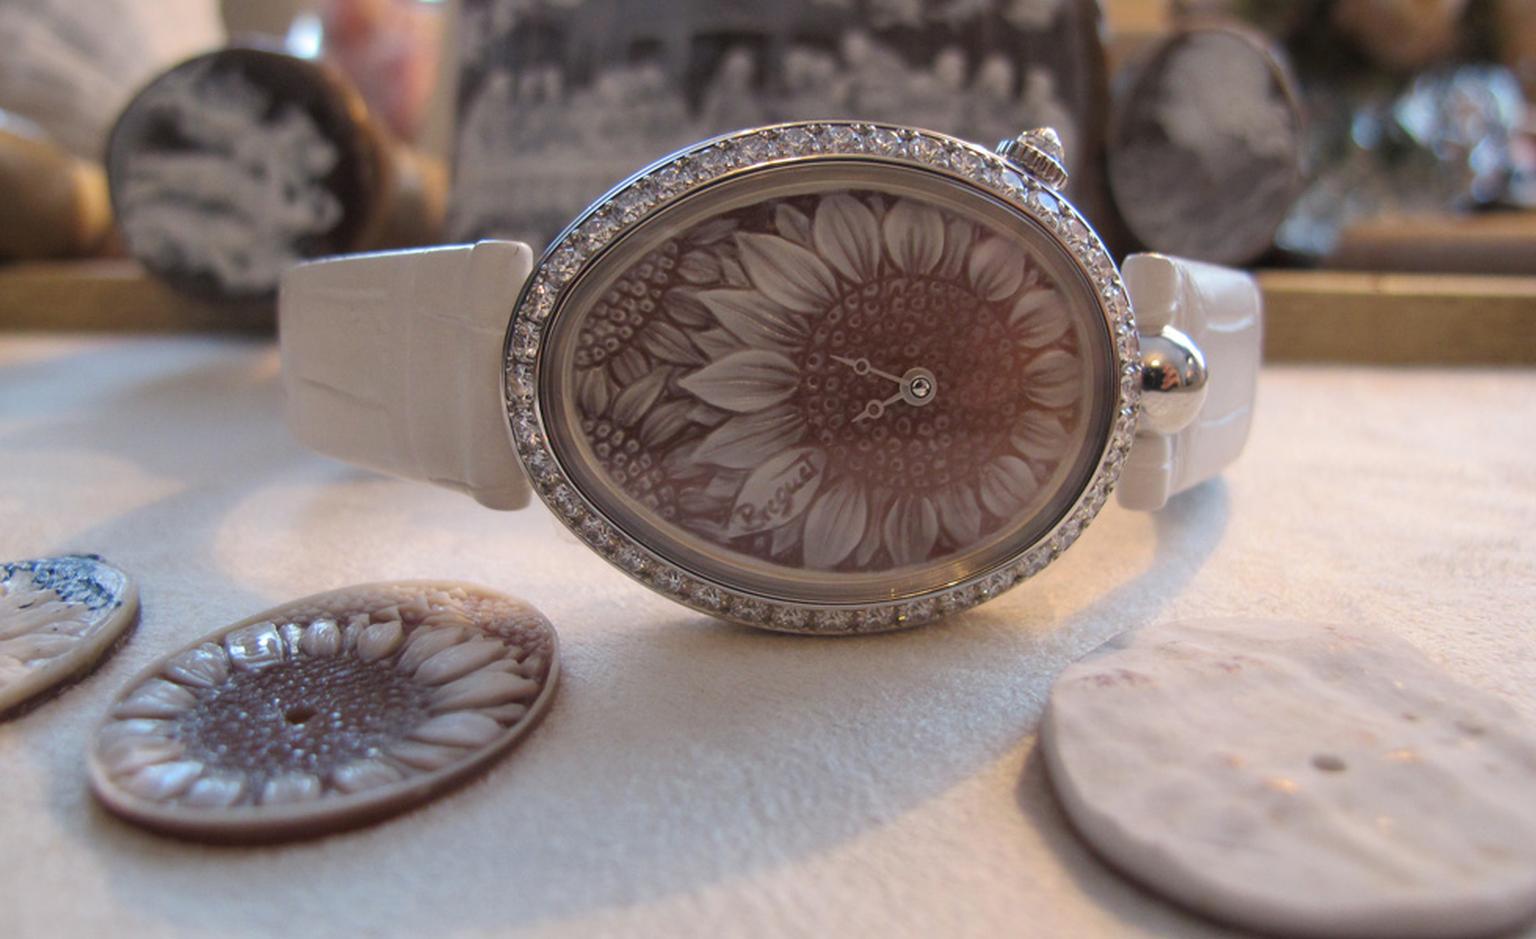 A finished Breguet Reine de Naples watch with a sunflower dial in cameo.